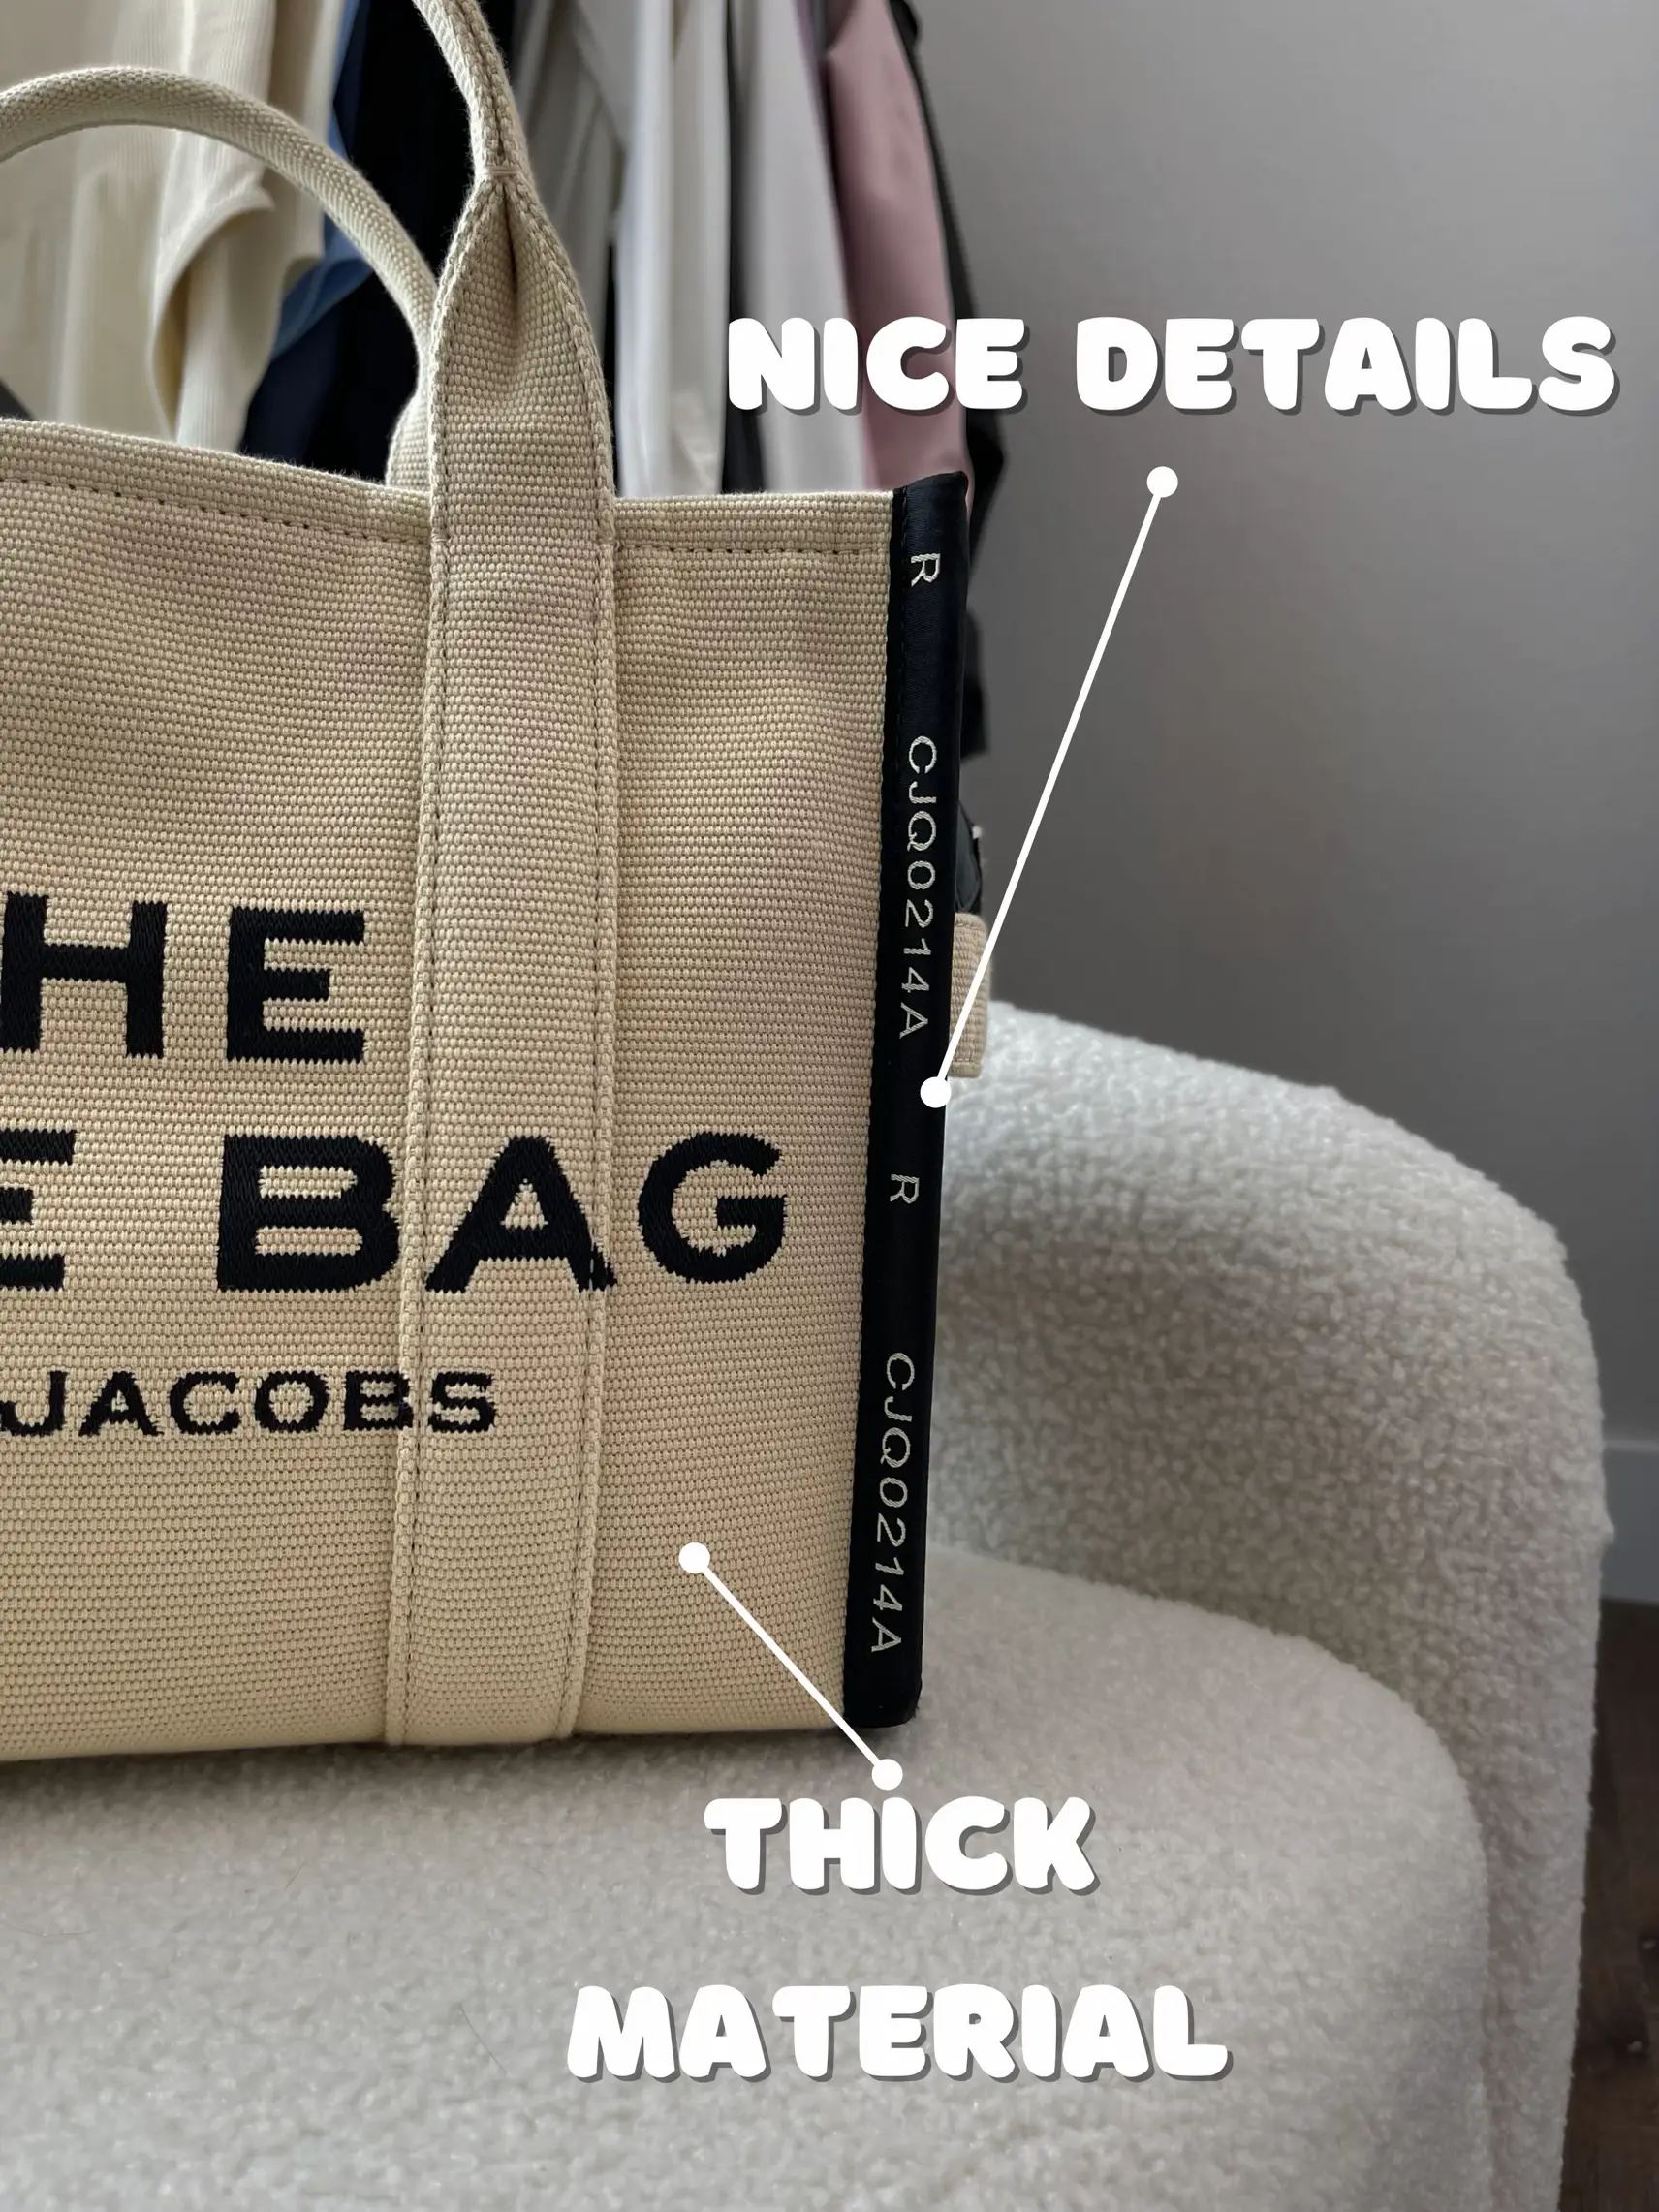 Reviewing 3 Sizes of the Marc Jacobs Tote Bag, Gallery posted by IamJamila